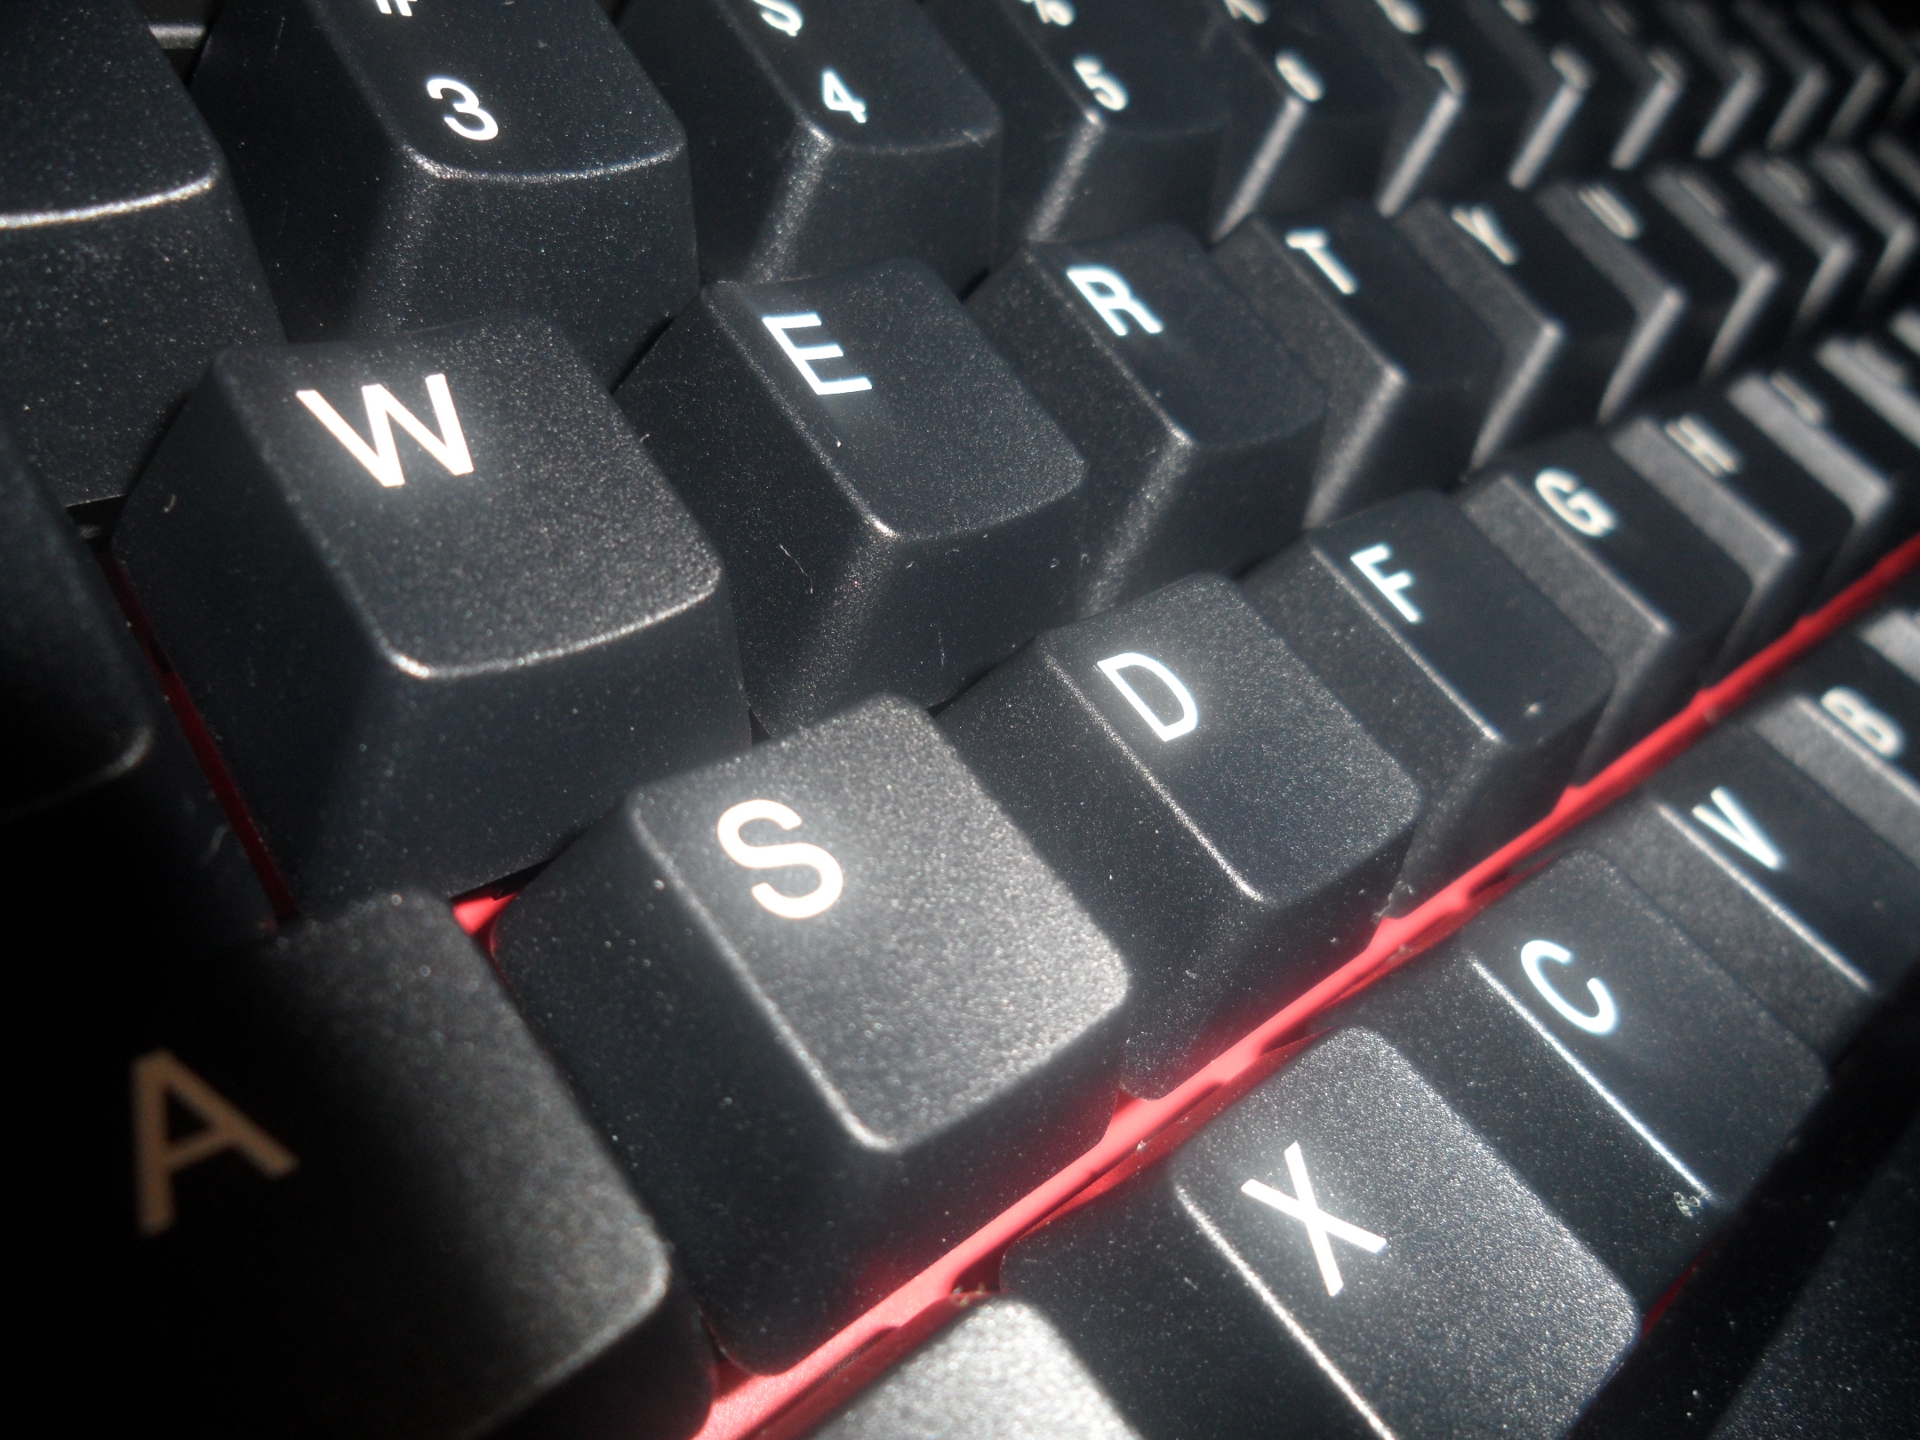 keyboard wallpaper,computer keyboard,input device,electronic device,technology,computer component